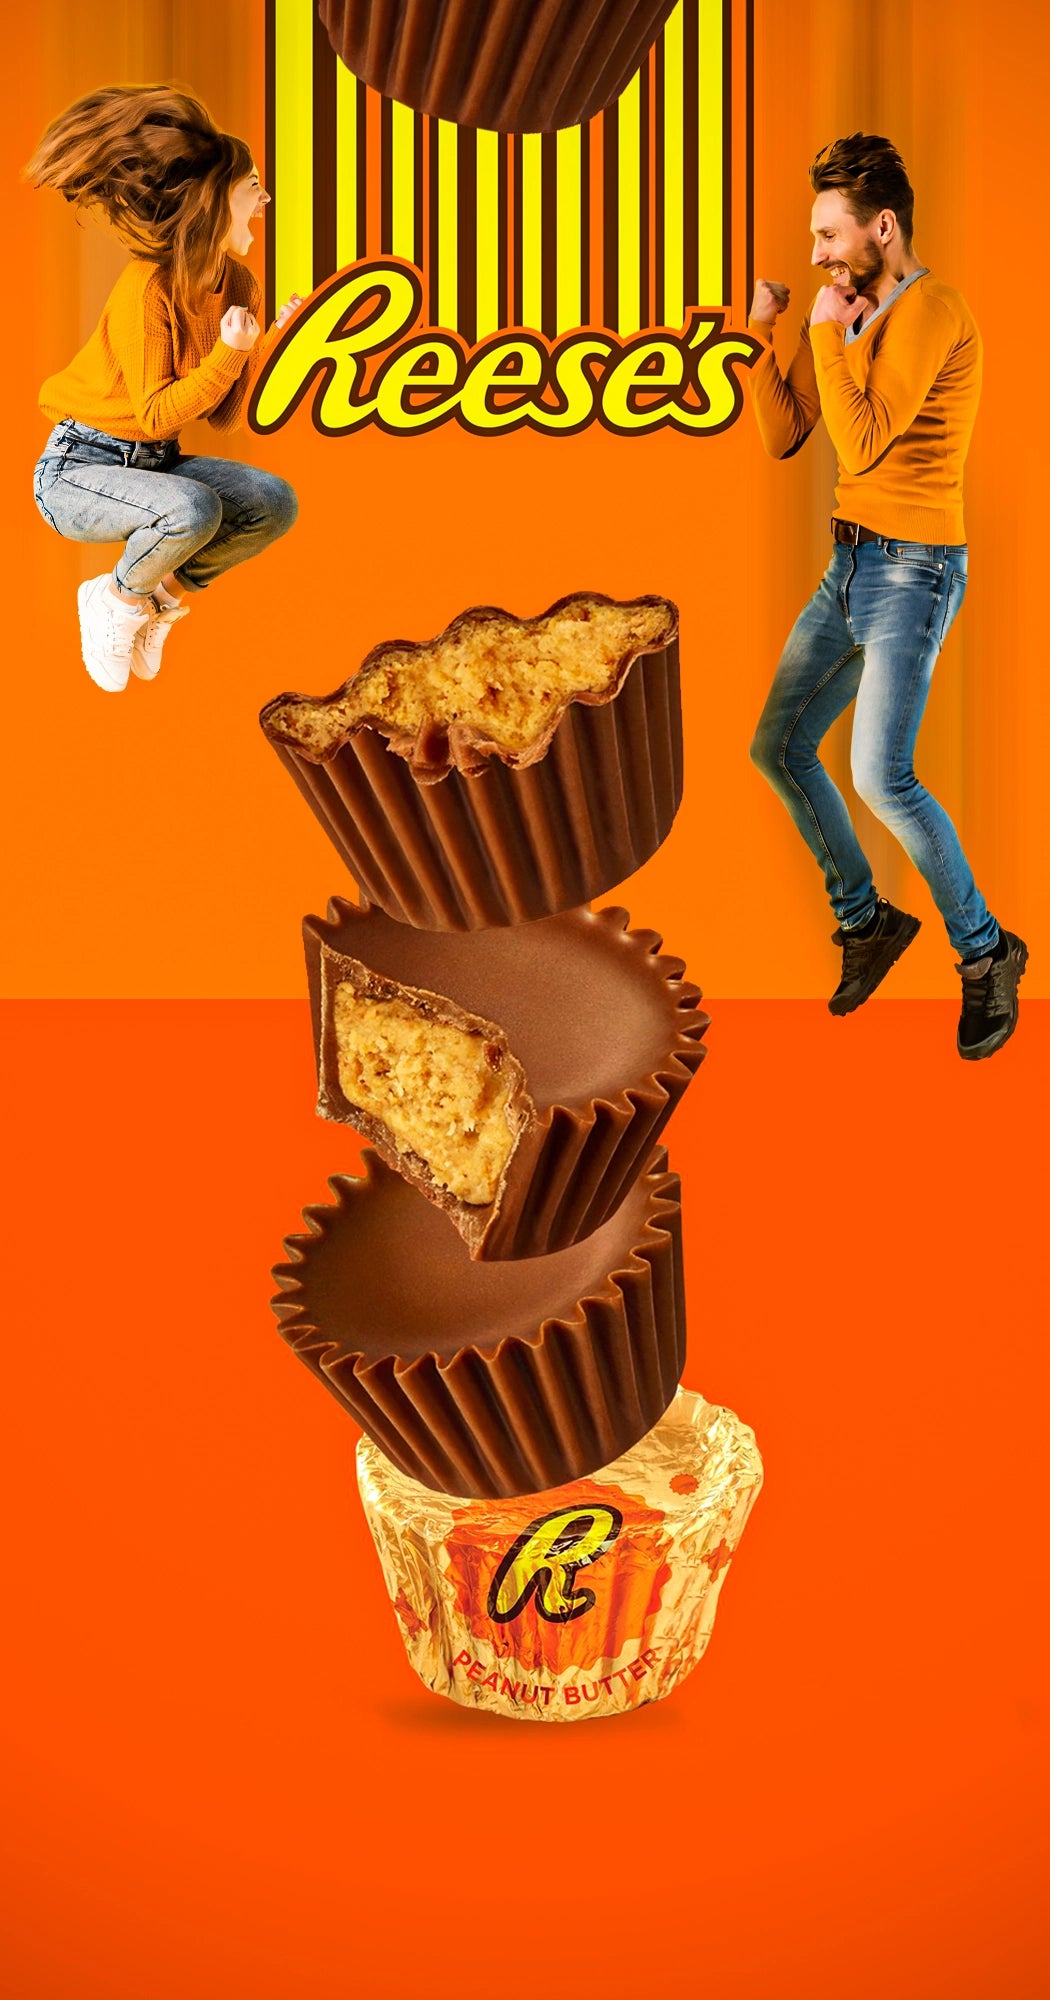 Reeses in collection banner